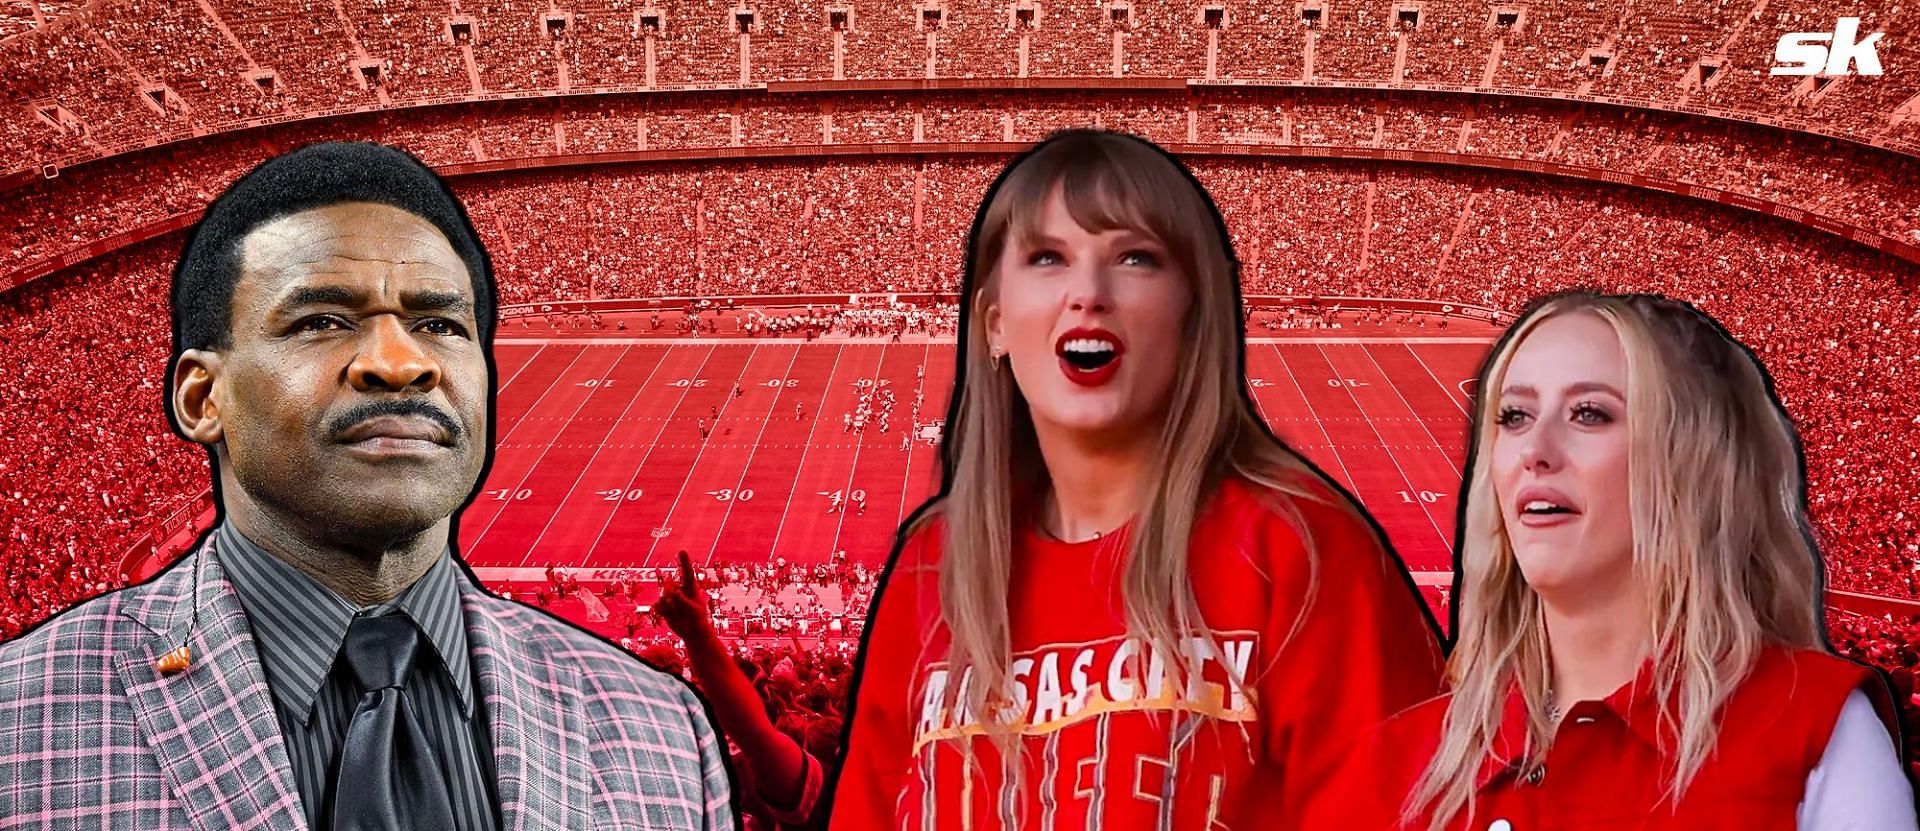 Michael Irvin thinks Brittany Mahomes is faking a friendship with Taylor Swift